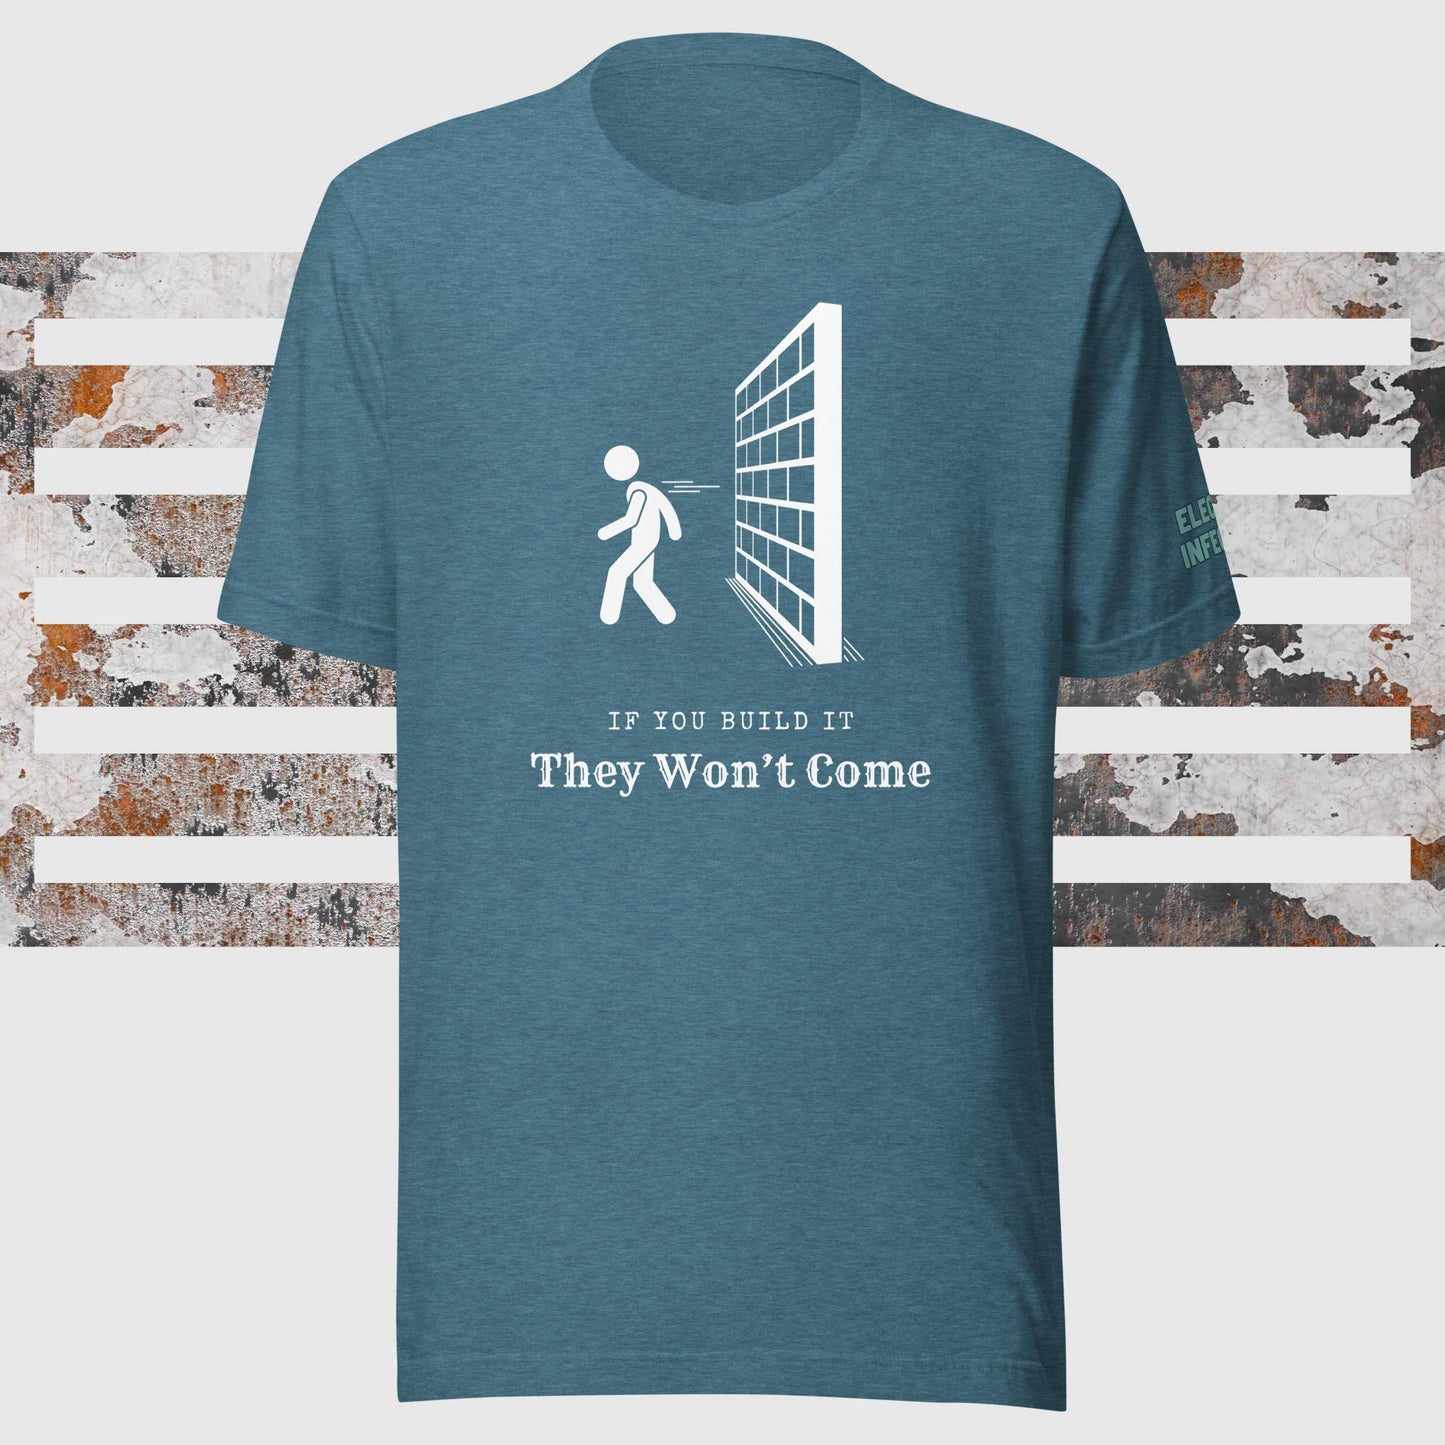 Build the Wall t-shirt